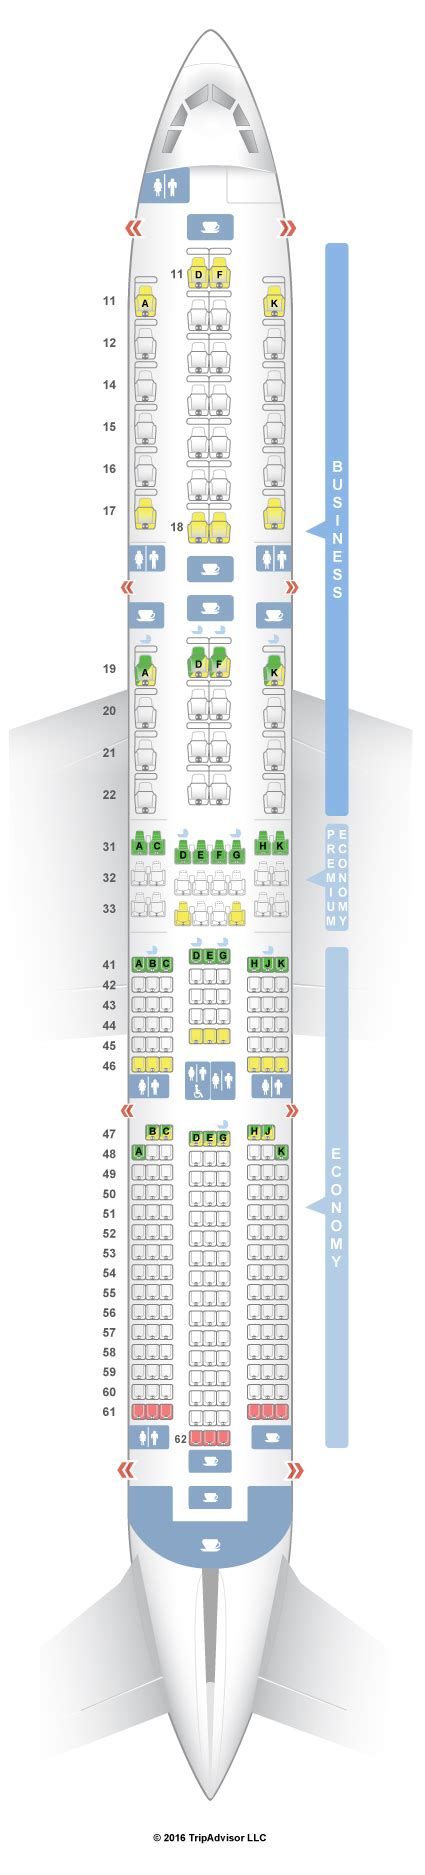 Airbus A350 900 Singapore Airlines Seat Map Airbus A350 900 Seat Map